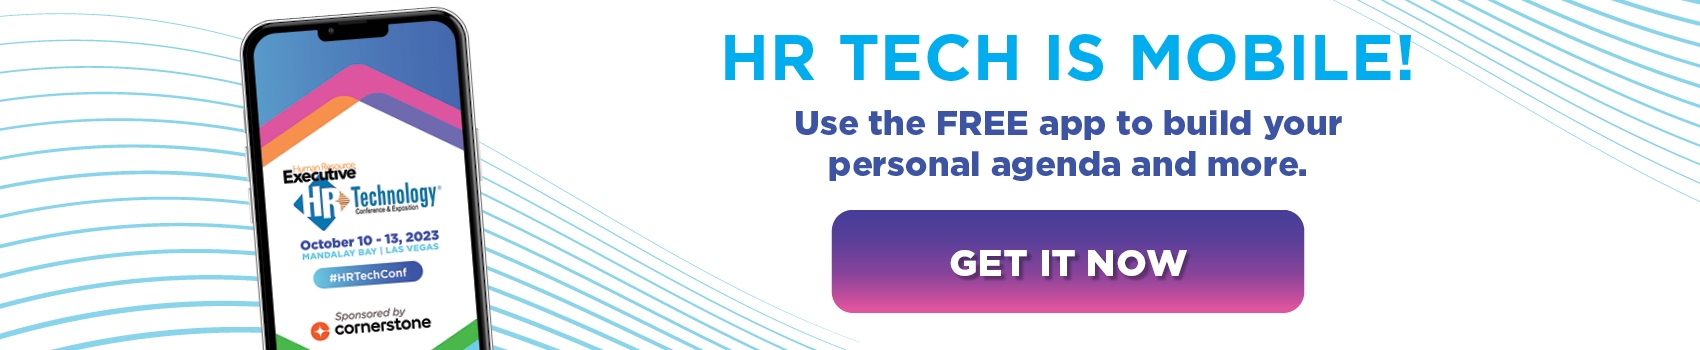 HR Tech is Mobile! Use the FREE app to build your personal agenda and more.